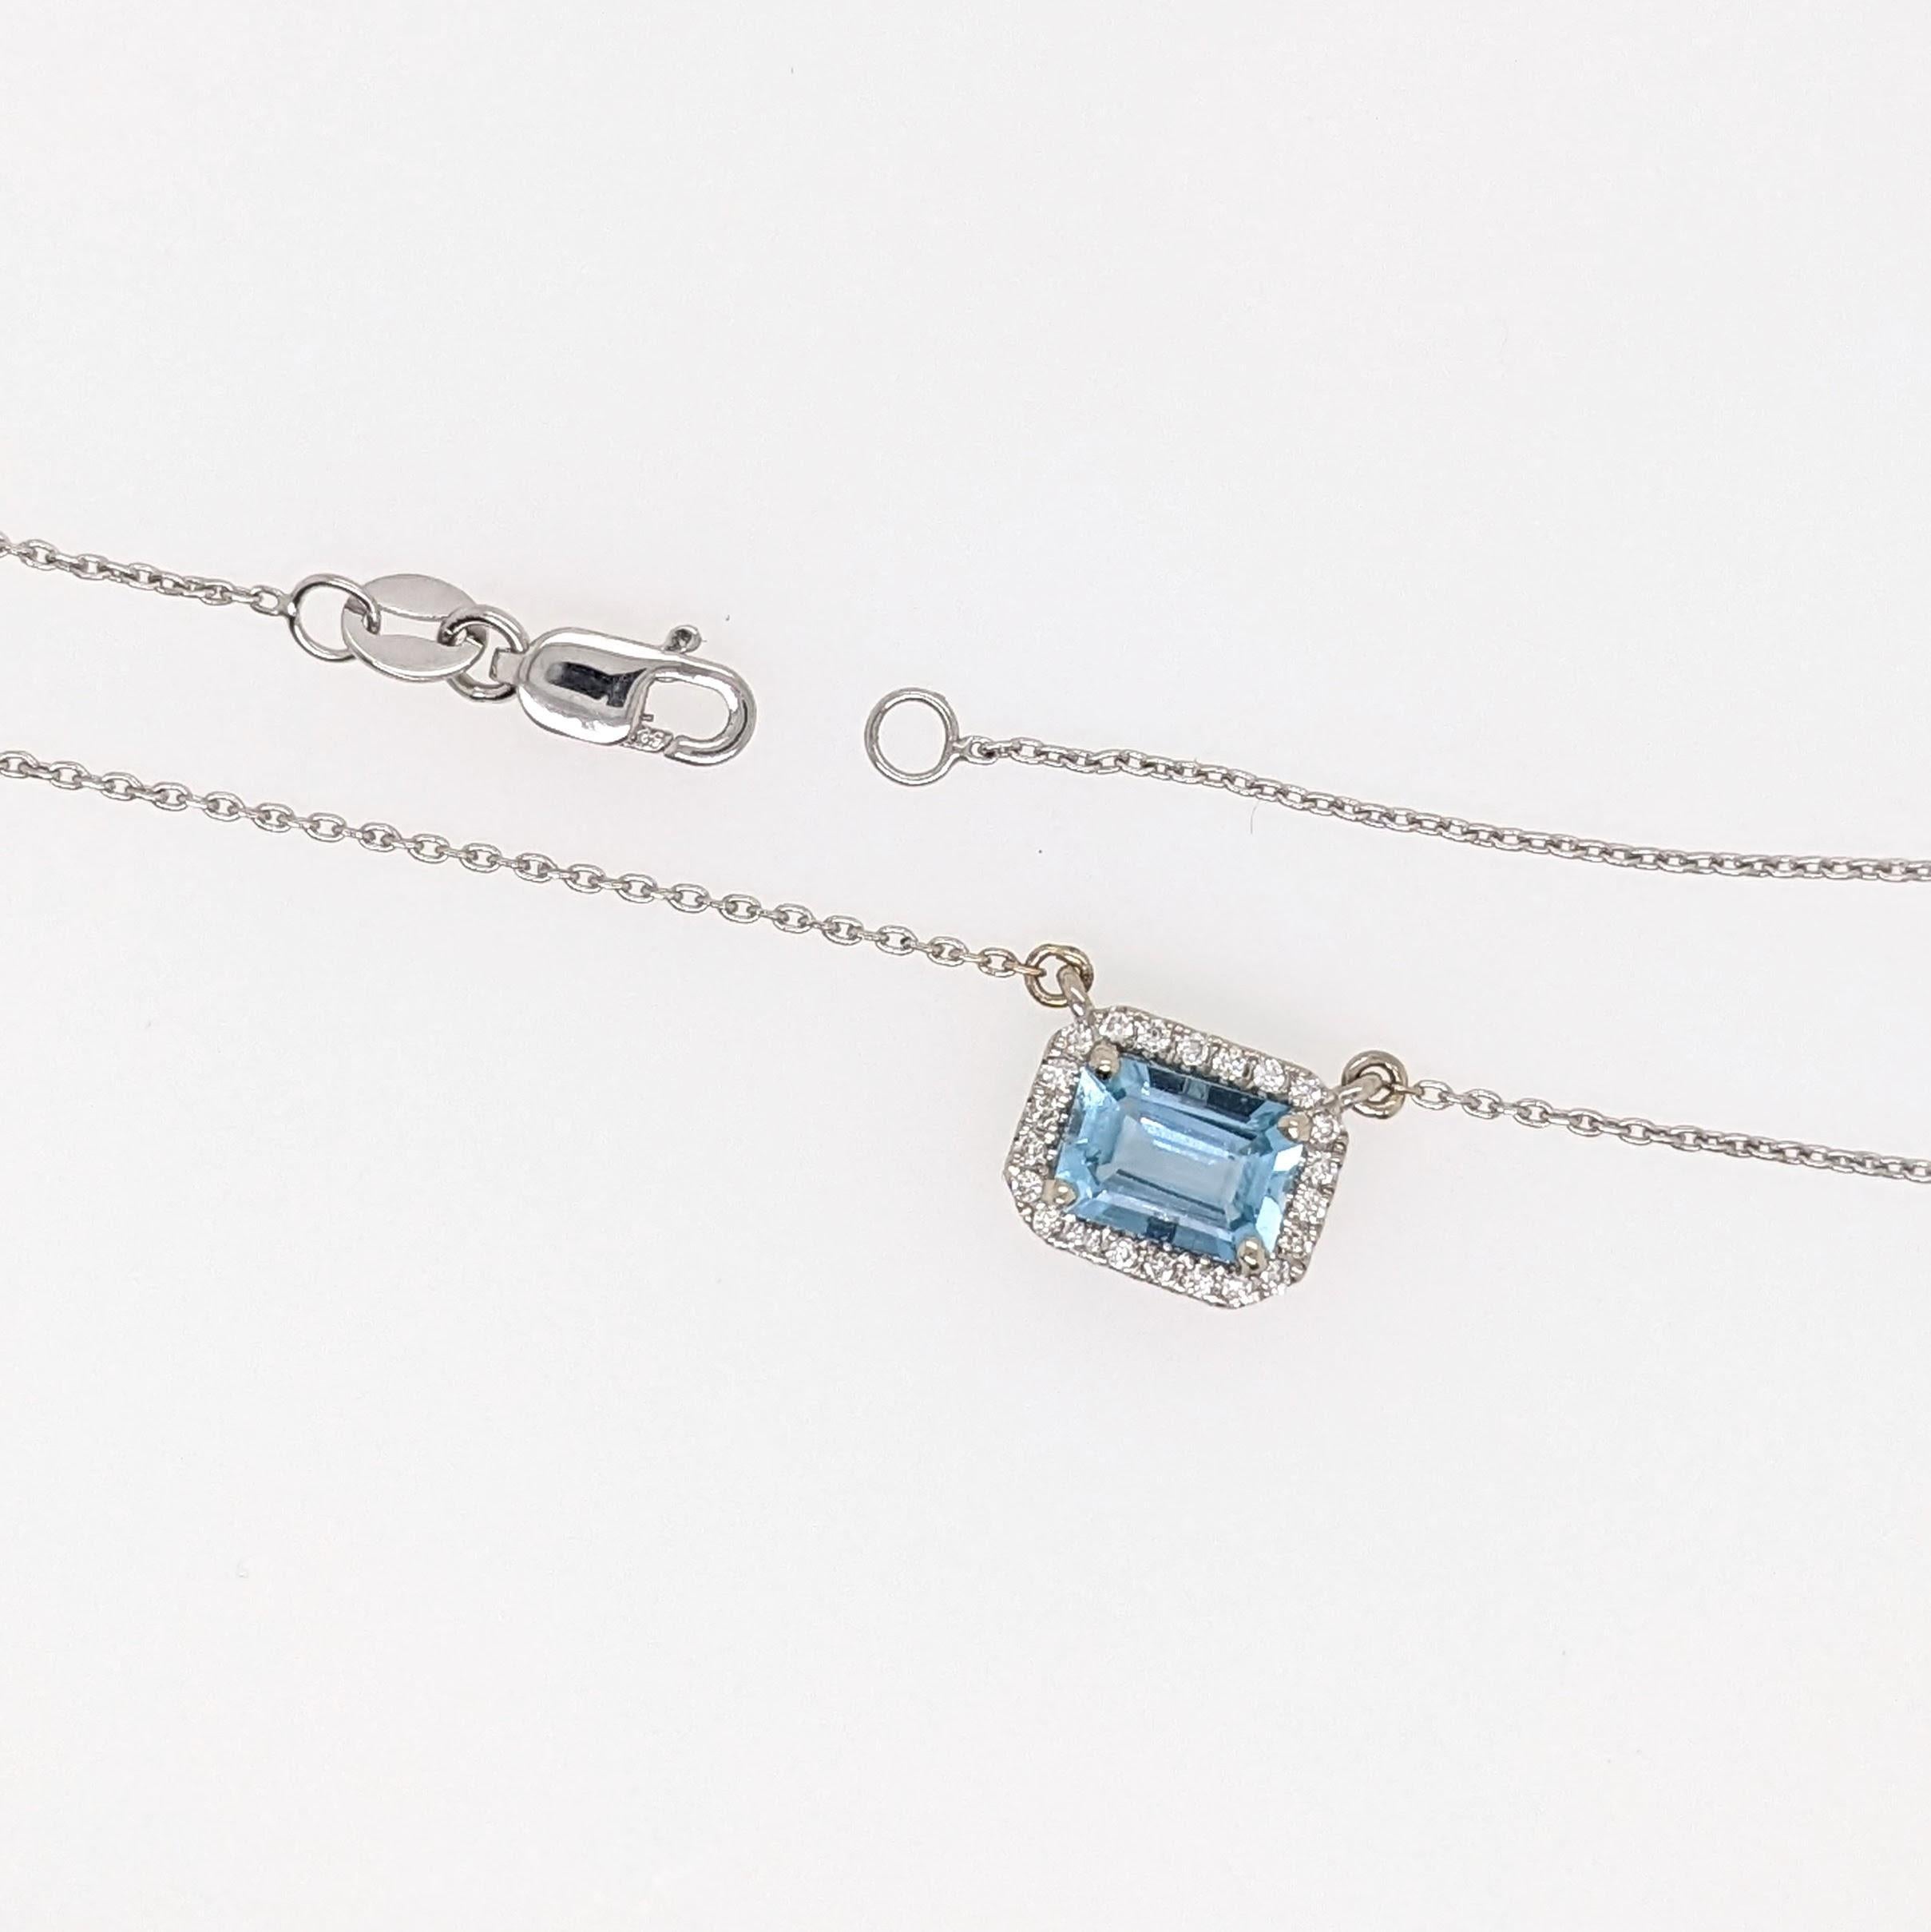 This gorgeous pendant showcases a 5x7mm emerald cut aquamarine set in a diamond accented pendant in 14k white gold. This pendant also makes a beautiful March birthstone pendant for your loved ones.

Specifications

Item Type: Pendant
Centre